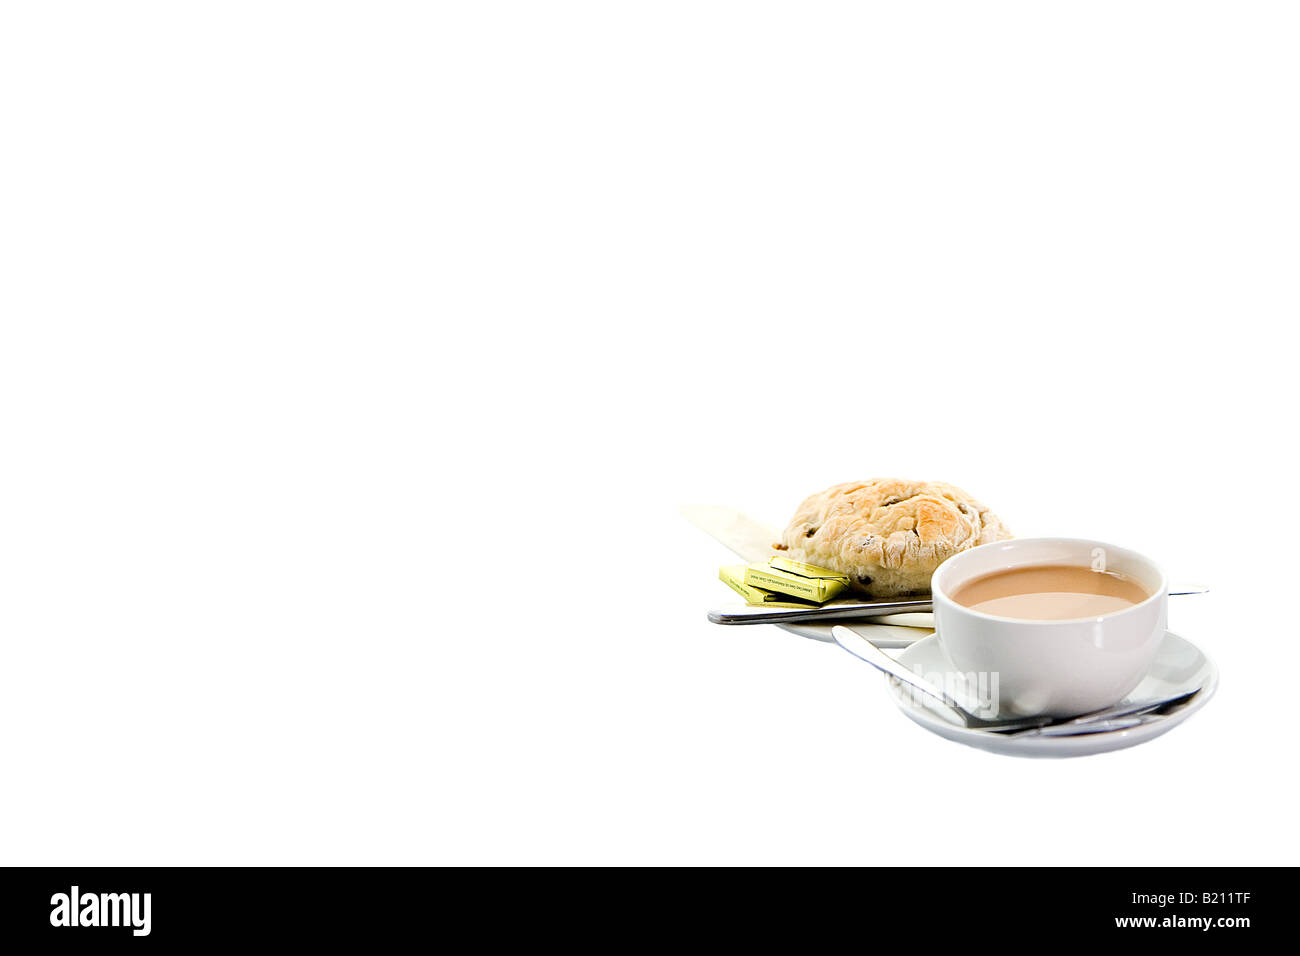 Cup of English breakfast tea and scone with room for text landscape format perfect for advertising Stock Photo